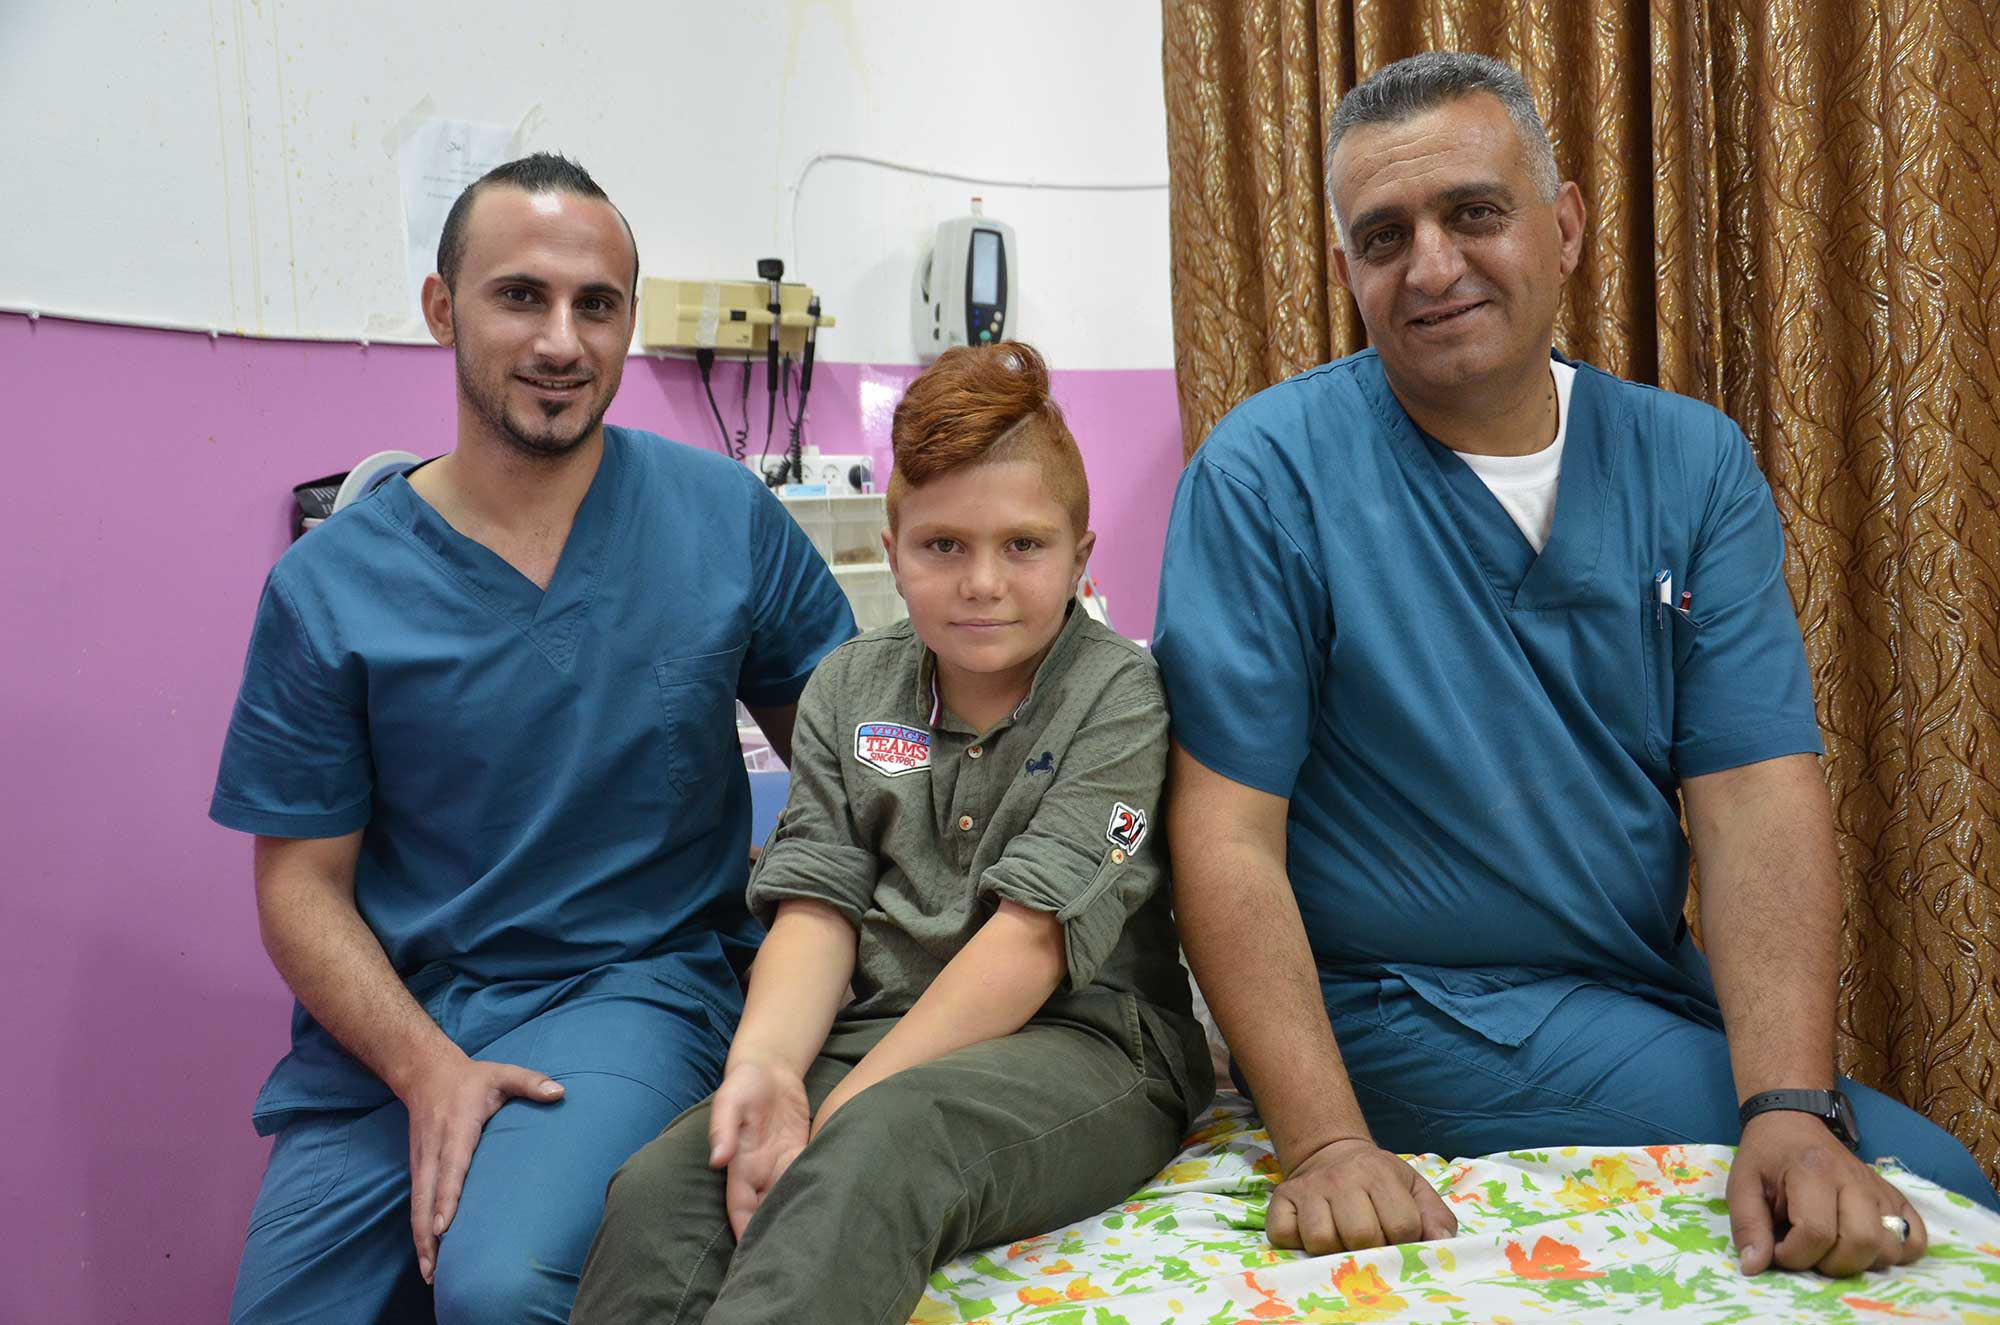 Dr. Salem Dudeen and Dr. Ali Ghrayeb pose for a picture with young Abdallah.